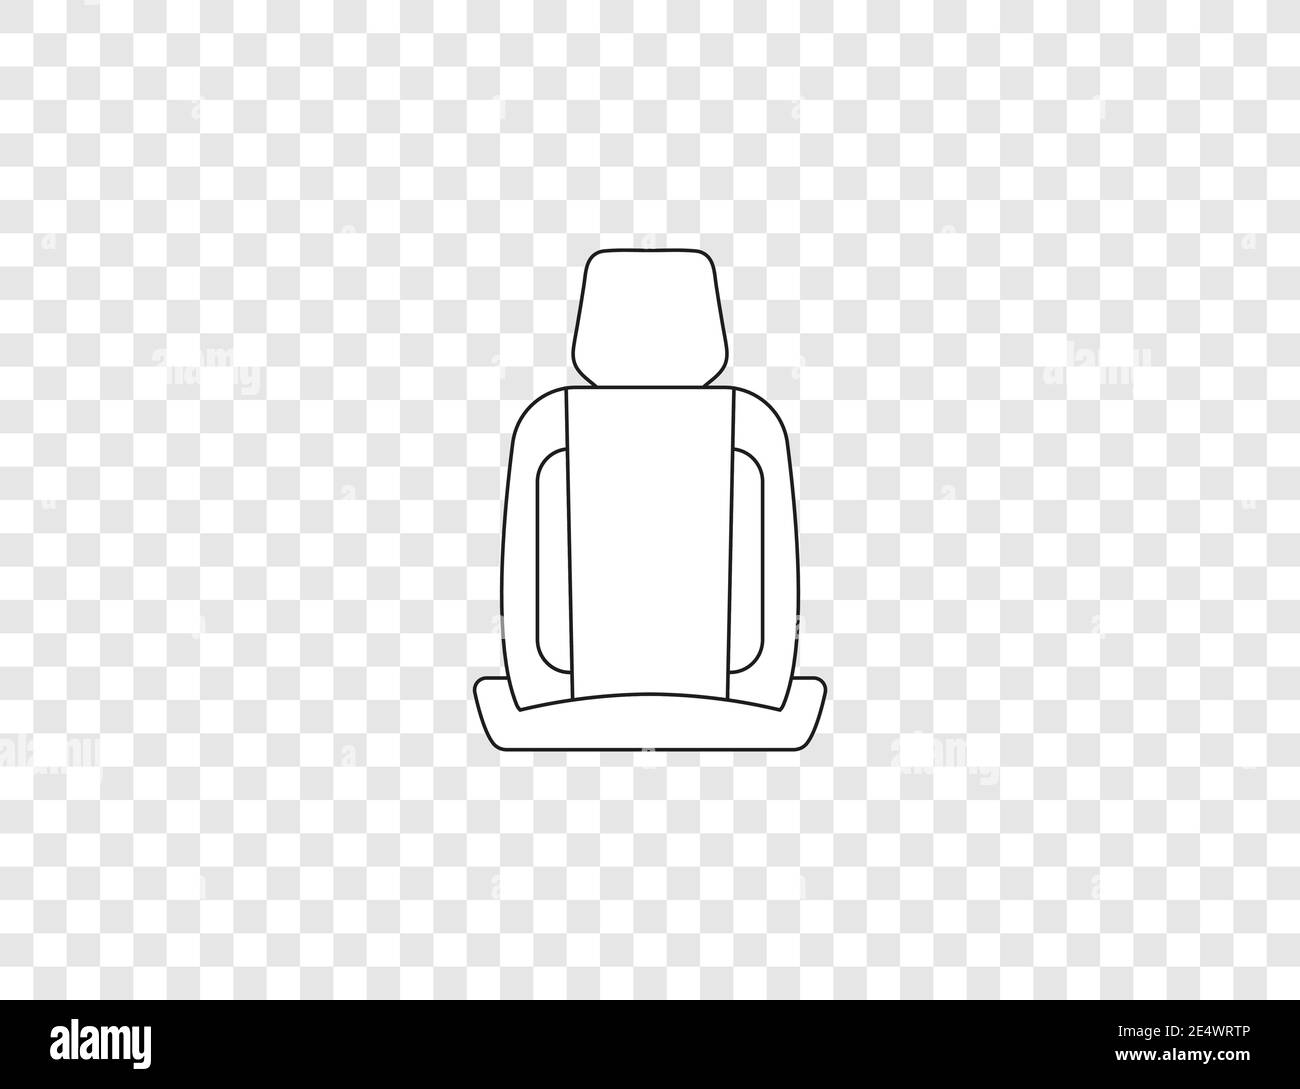 Car seat, safety icon. Vector illustration, flat design. Stock Vector